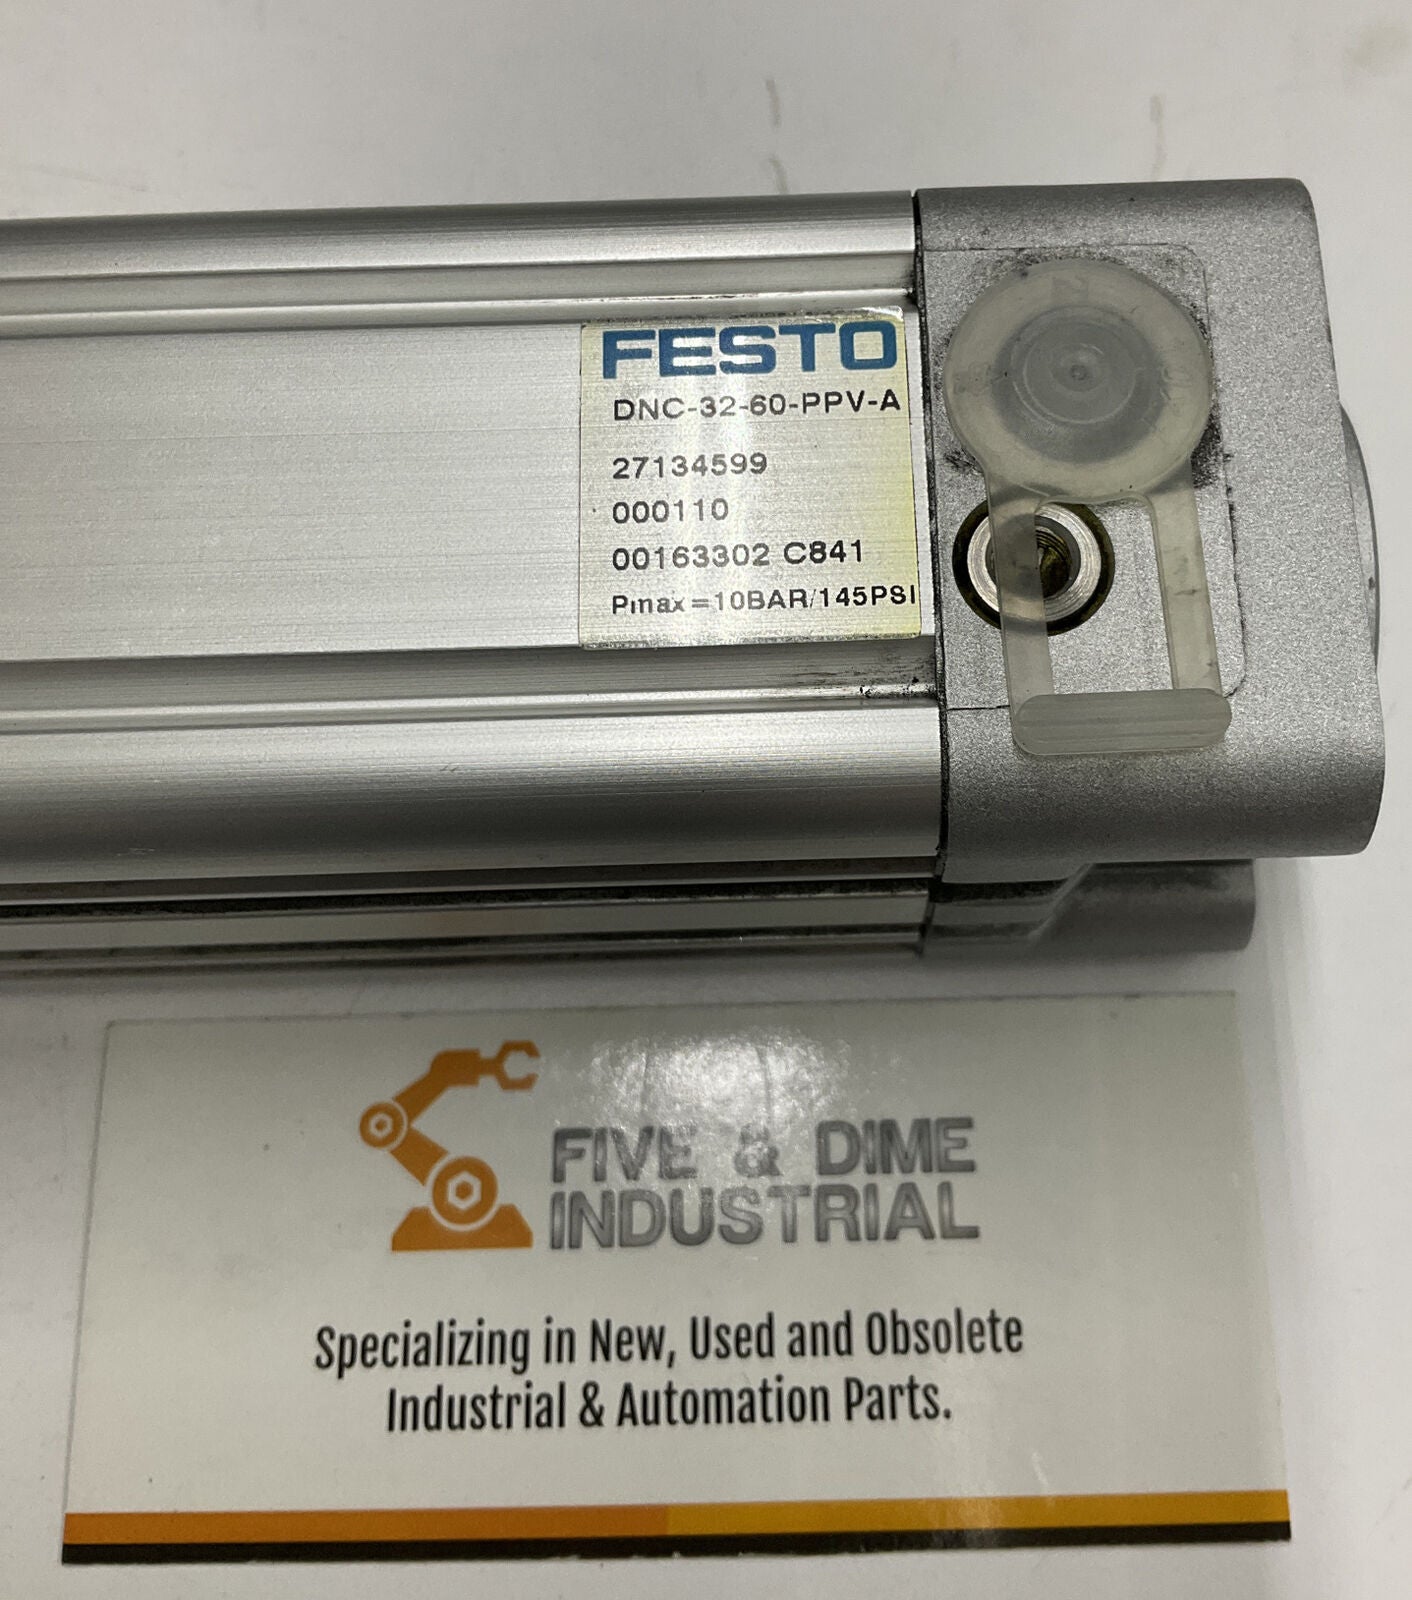 Festo DNC-32-60-PPV-A New Pneumatic Cylinder 145PSI (CL179)